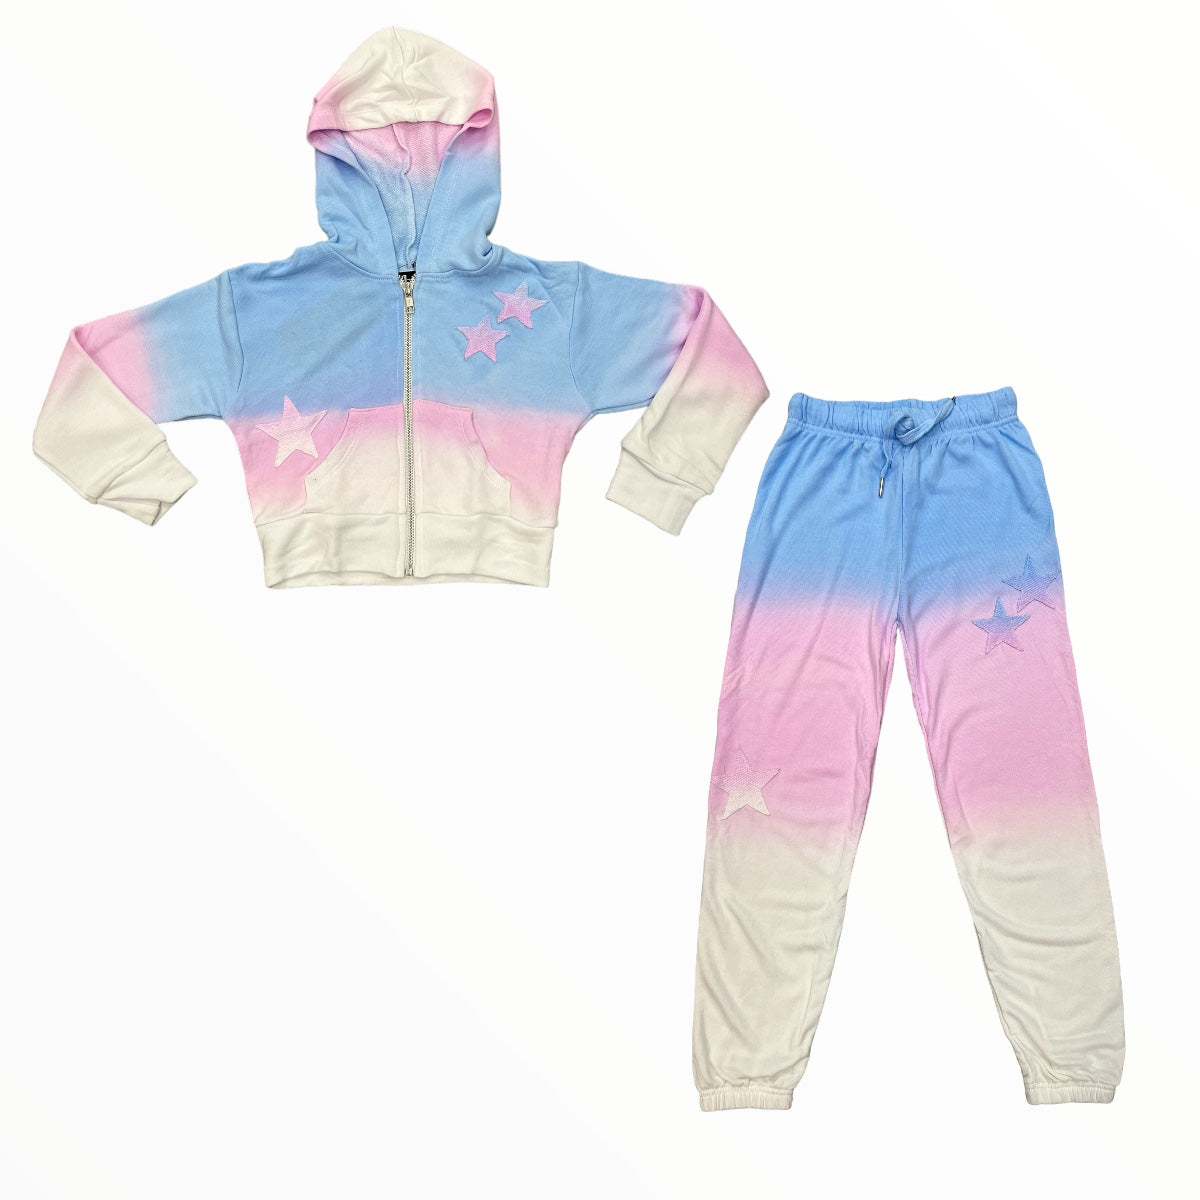 FLOWERS BY ZOE STAR PATCH SWEATPANT - BLUE/PINK/WHITE OMBRE